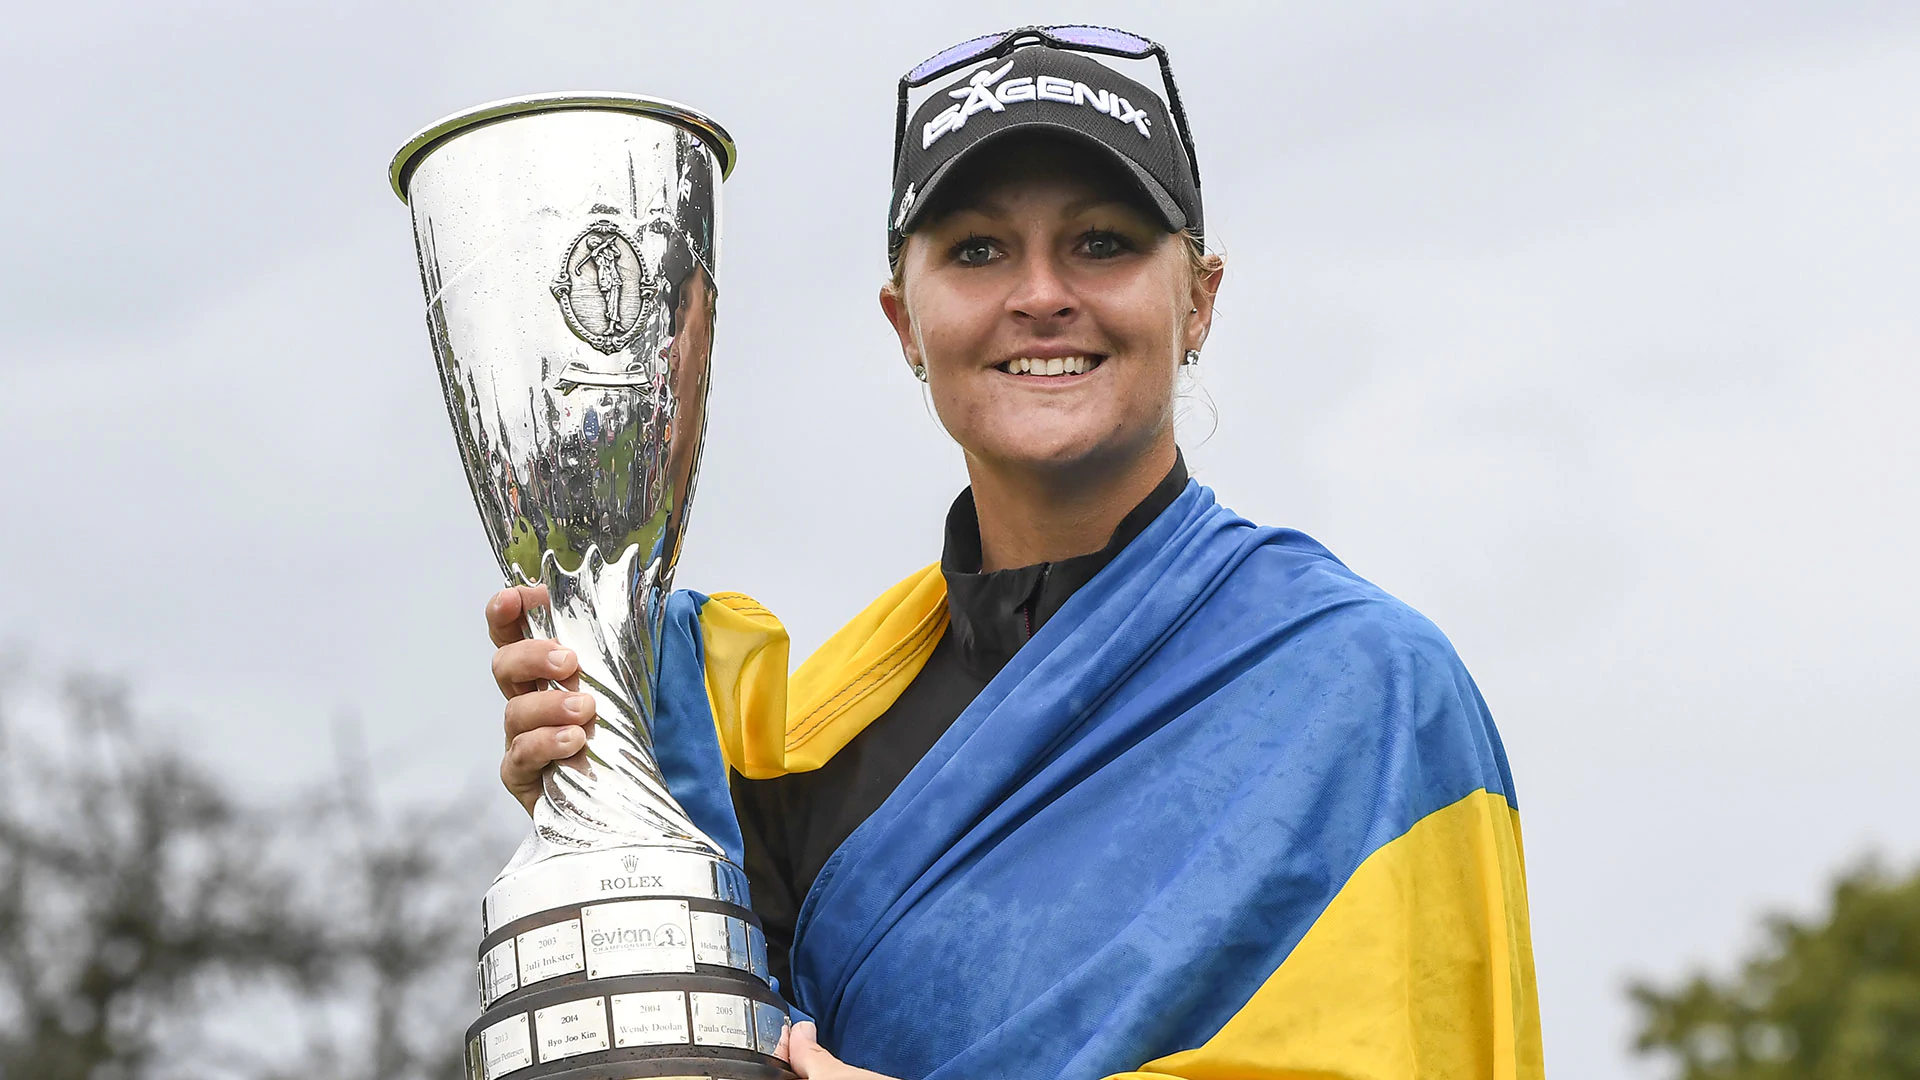 Nordqvist moves up to No. 4 after major victory